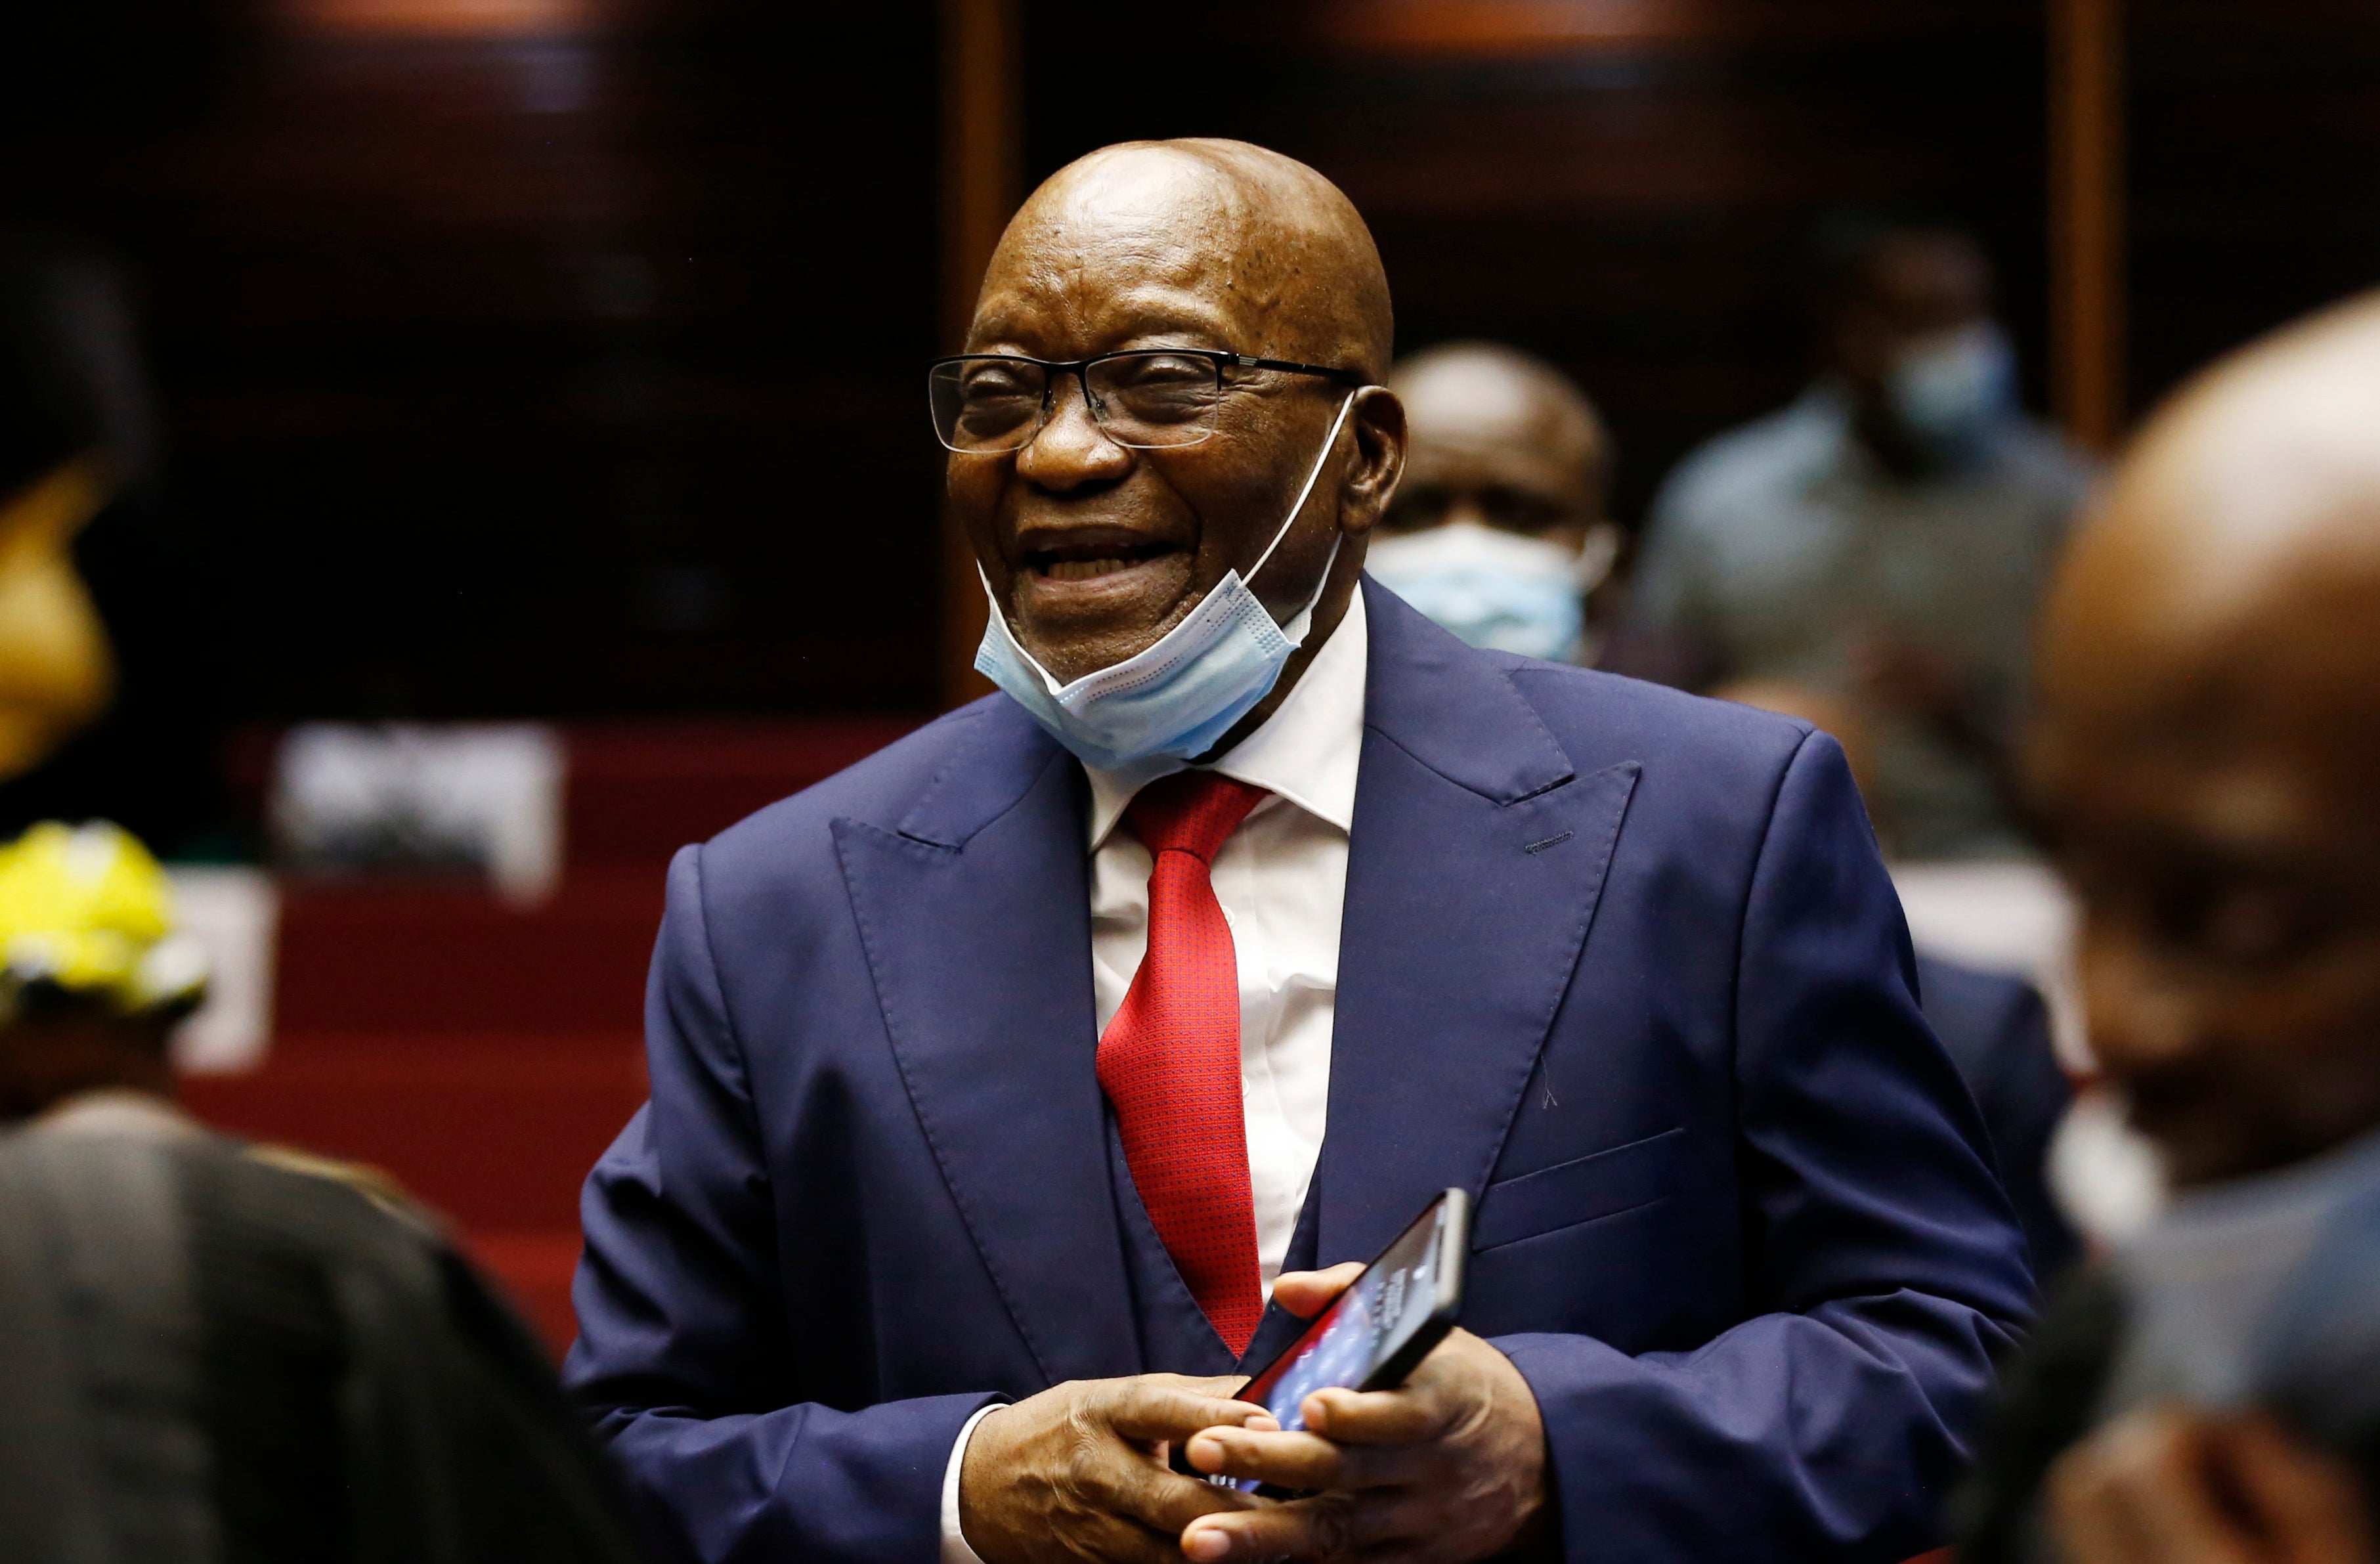 Former South African president Jacob Zuma has been sentenced to 15 months in jail after failing to appear at a corruption inquiry in February 2021